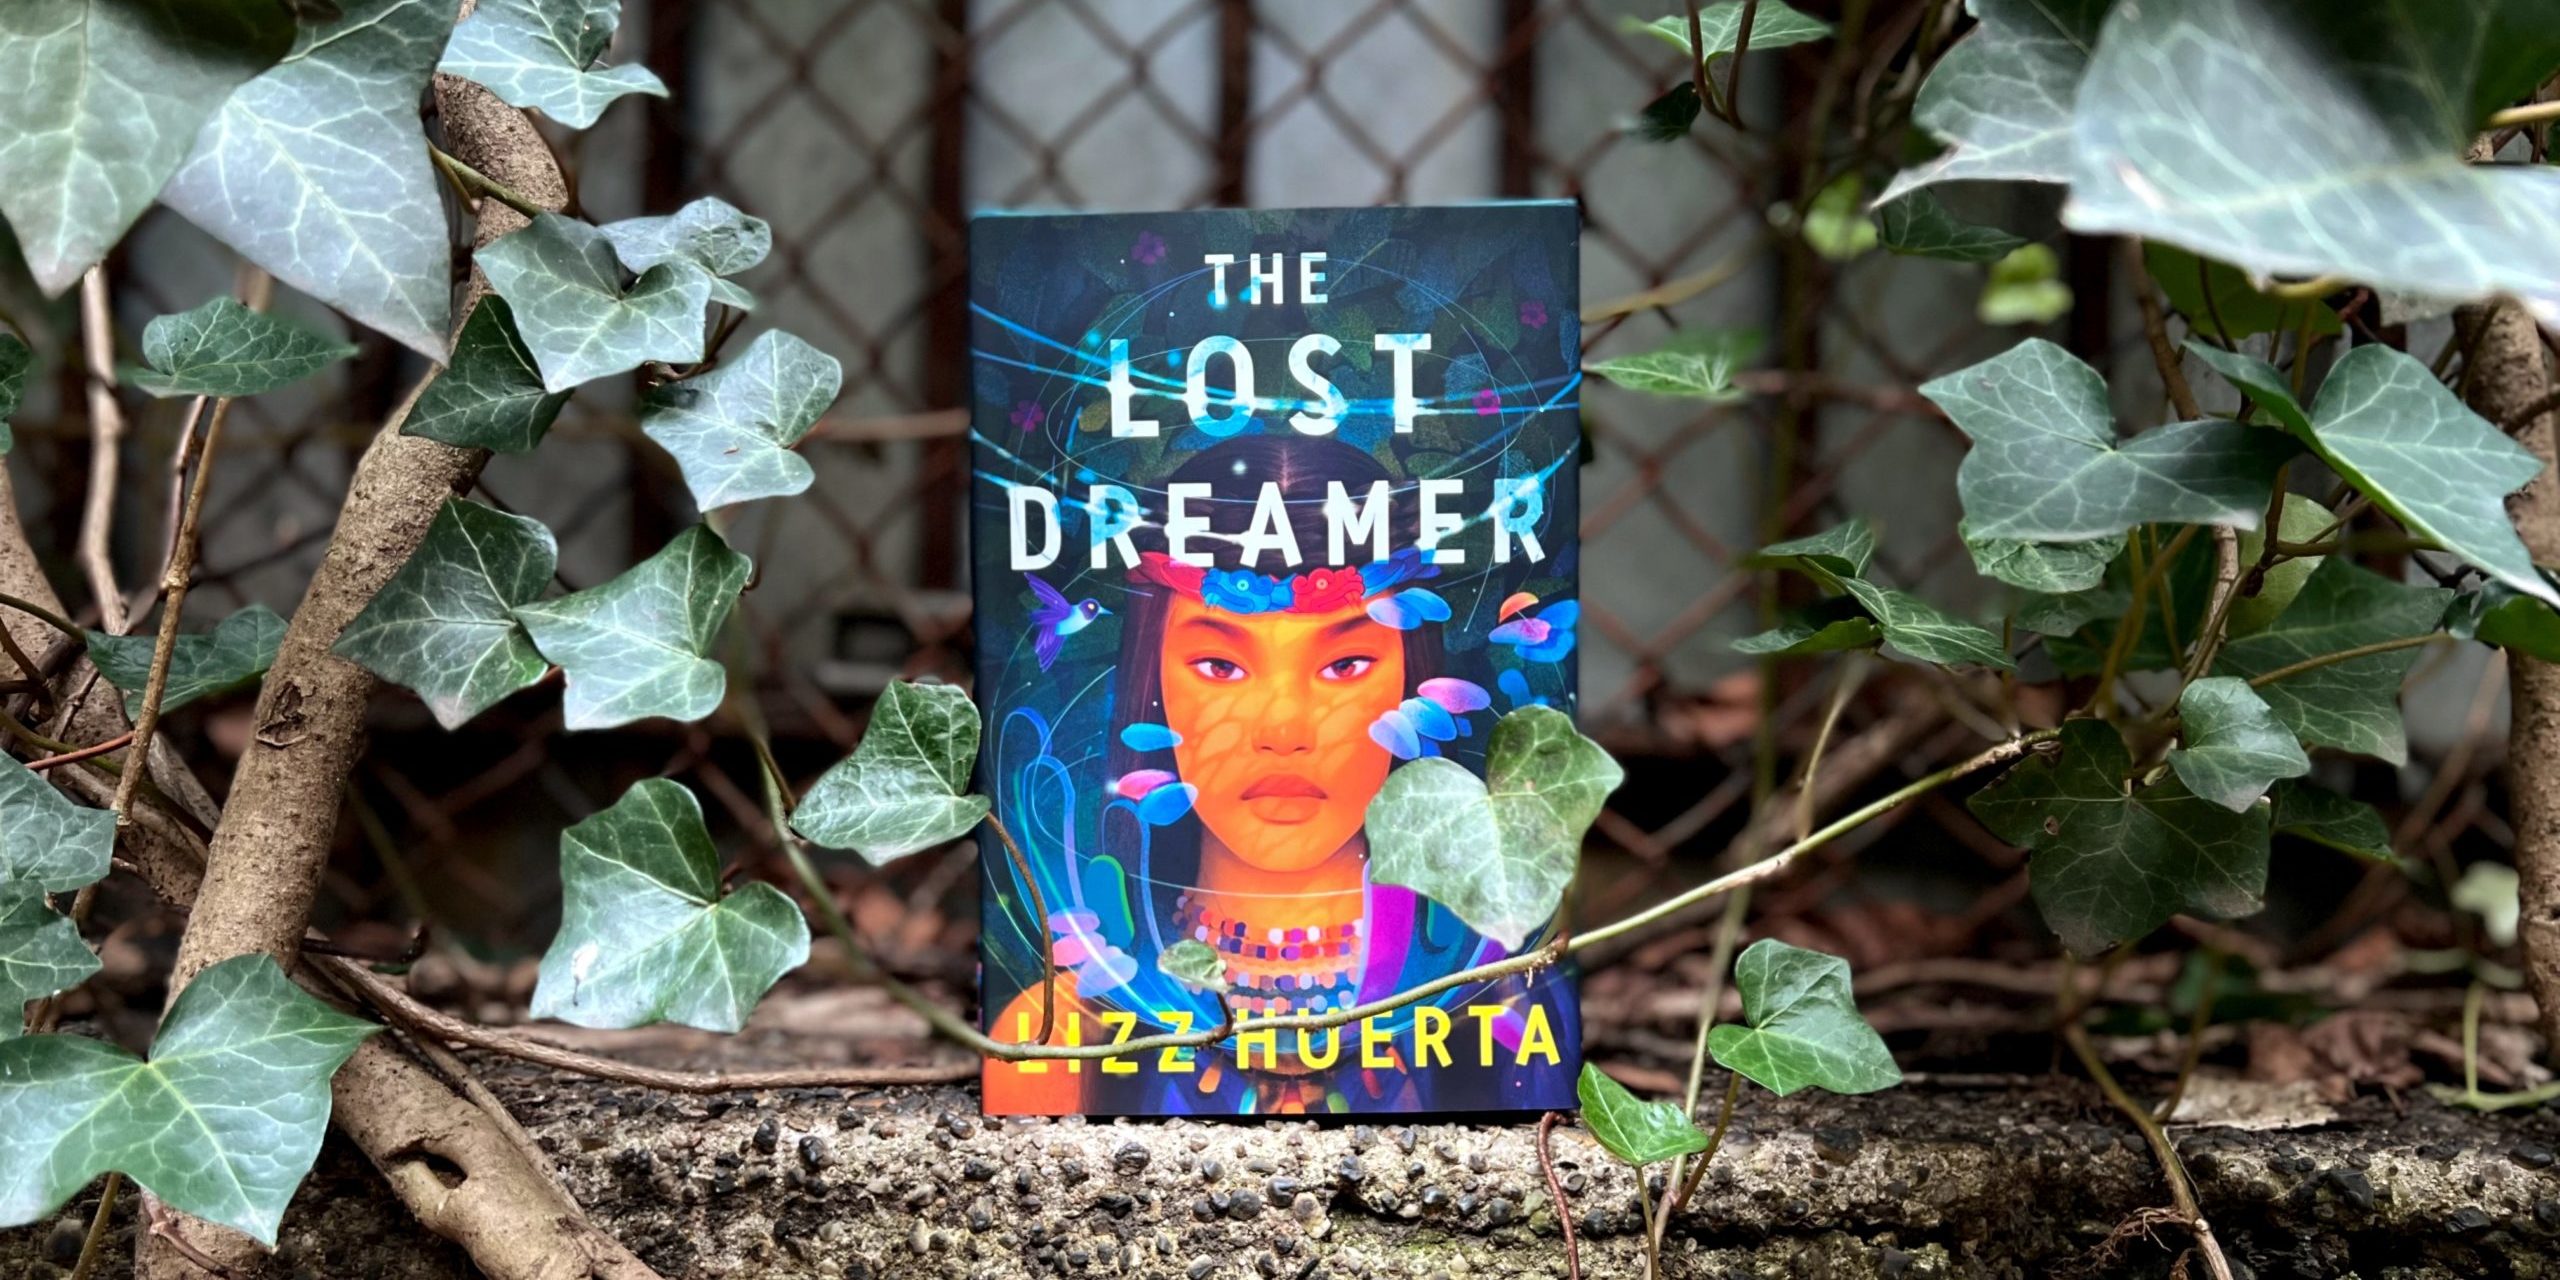 An Interview with Lizz Huerta, Author of The Lost Dreamer